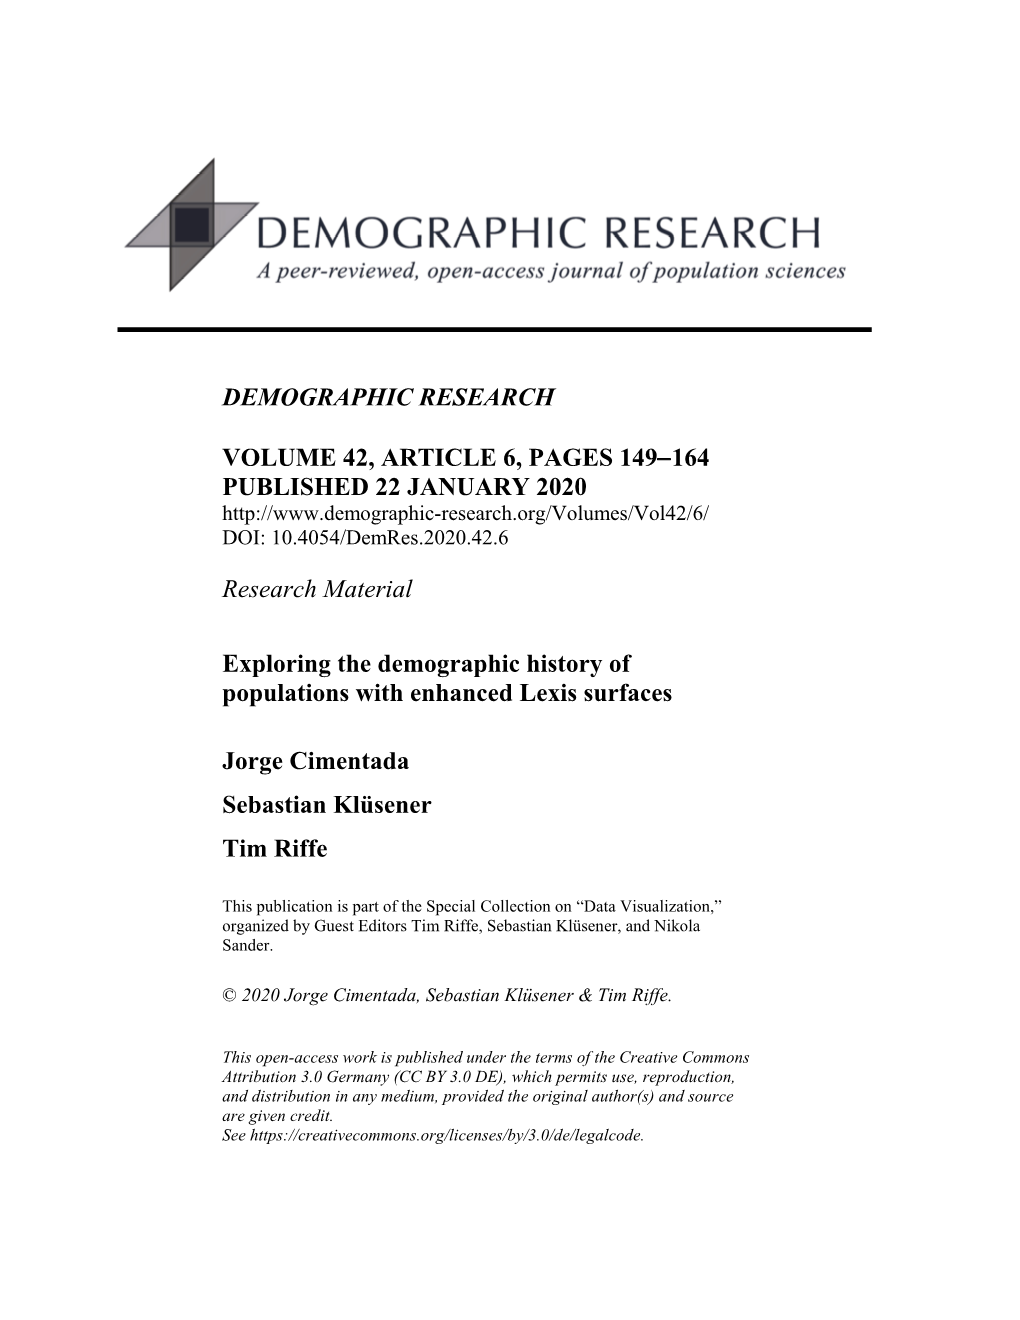 Demographic Research Volume 42, Article 6, Pages